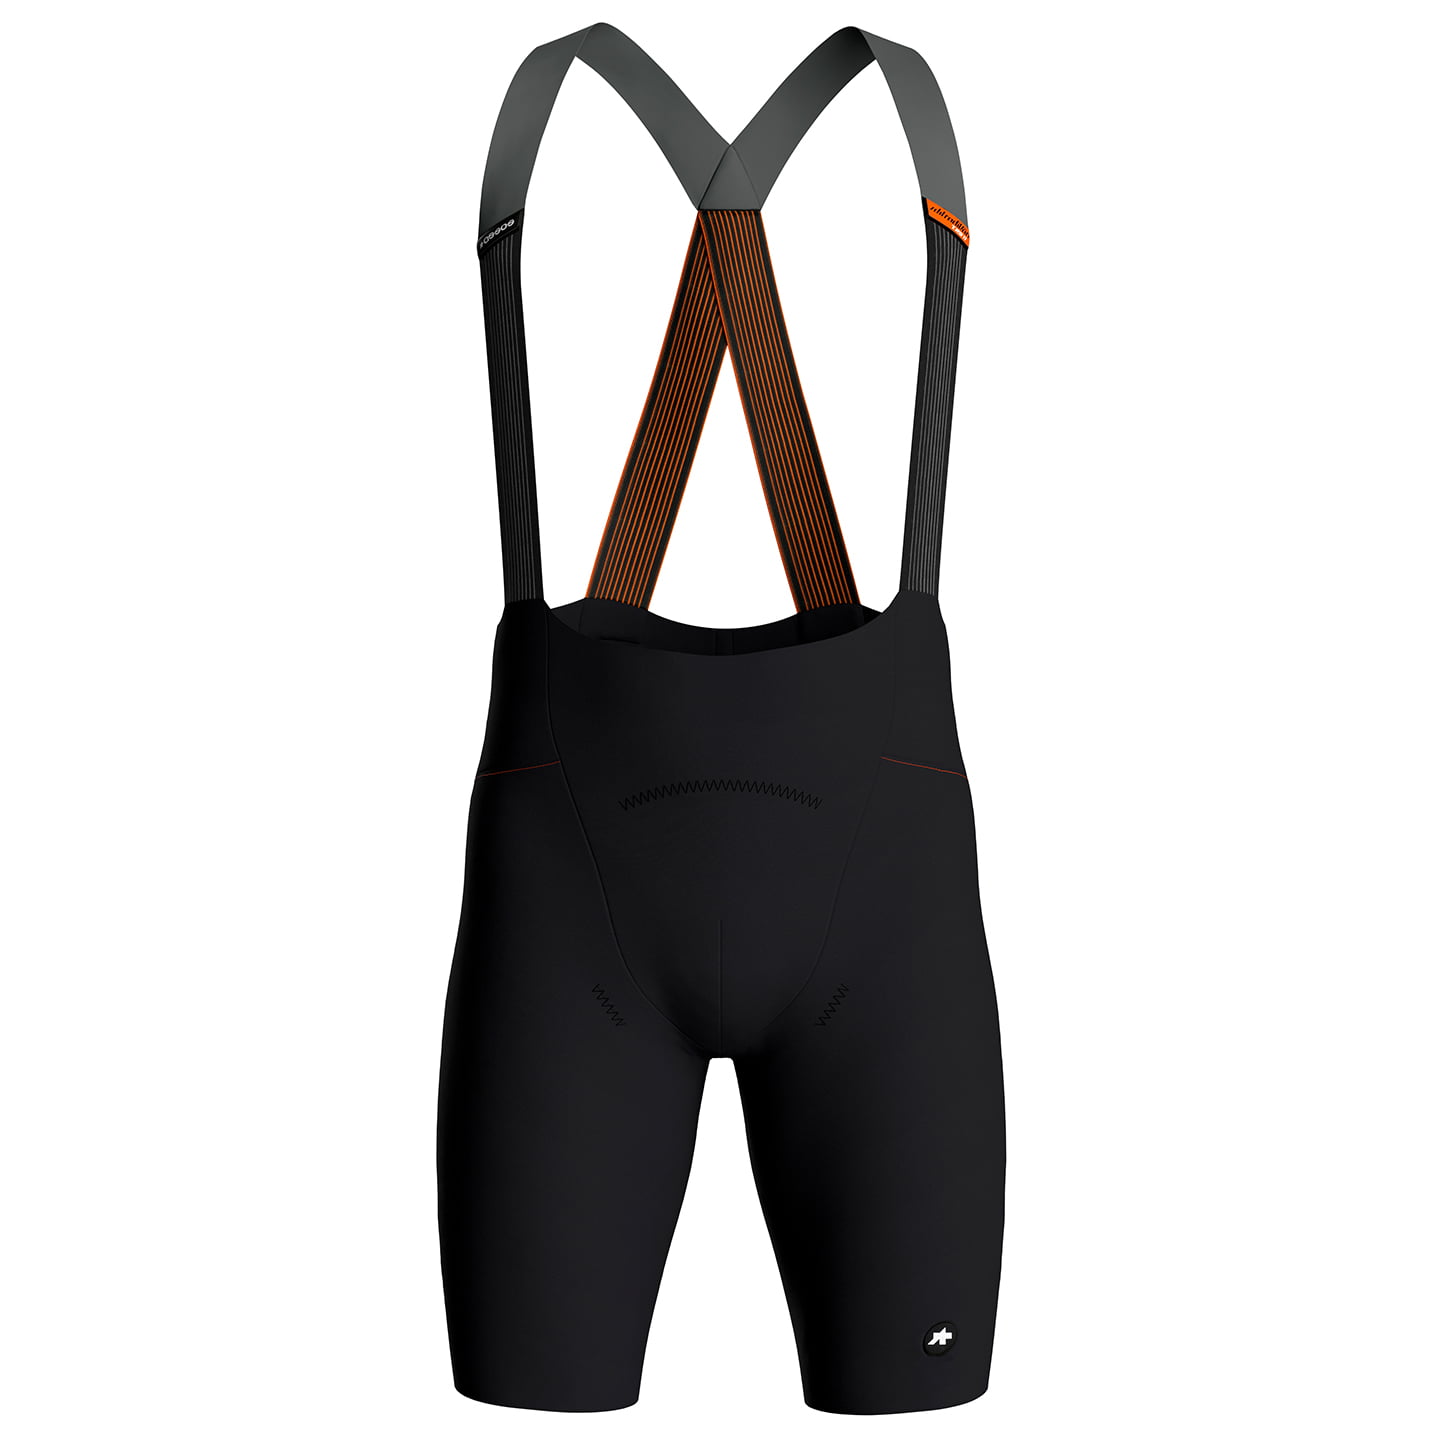 ASSOS Equipe RSR S11 Bib Shorts, for men, size S, Cycle trousers, Cycle clothing